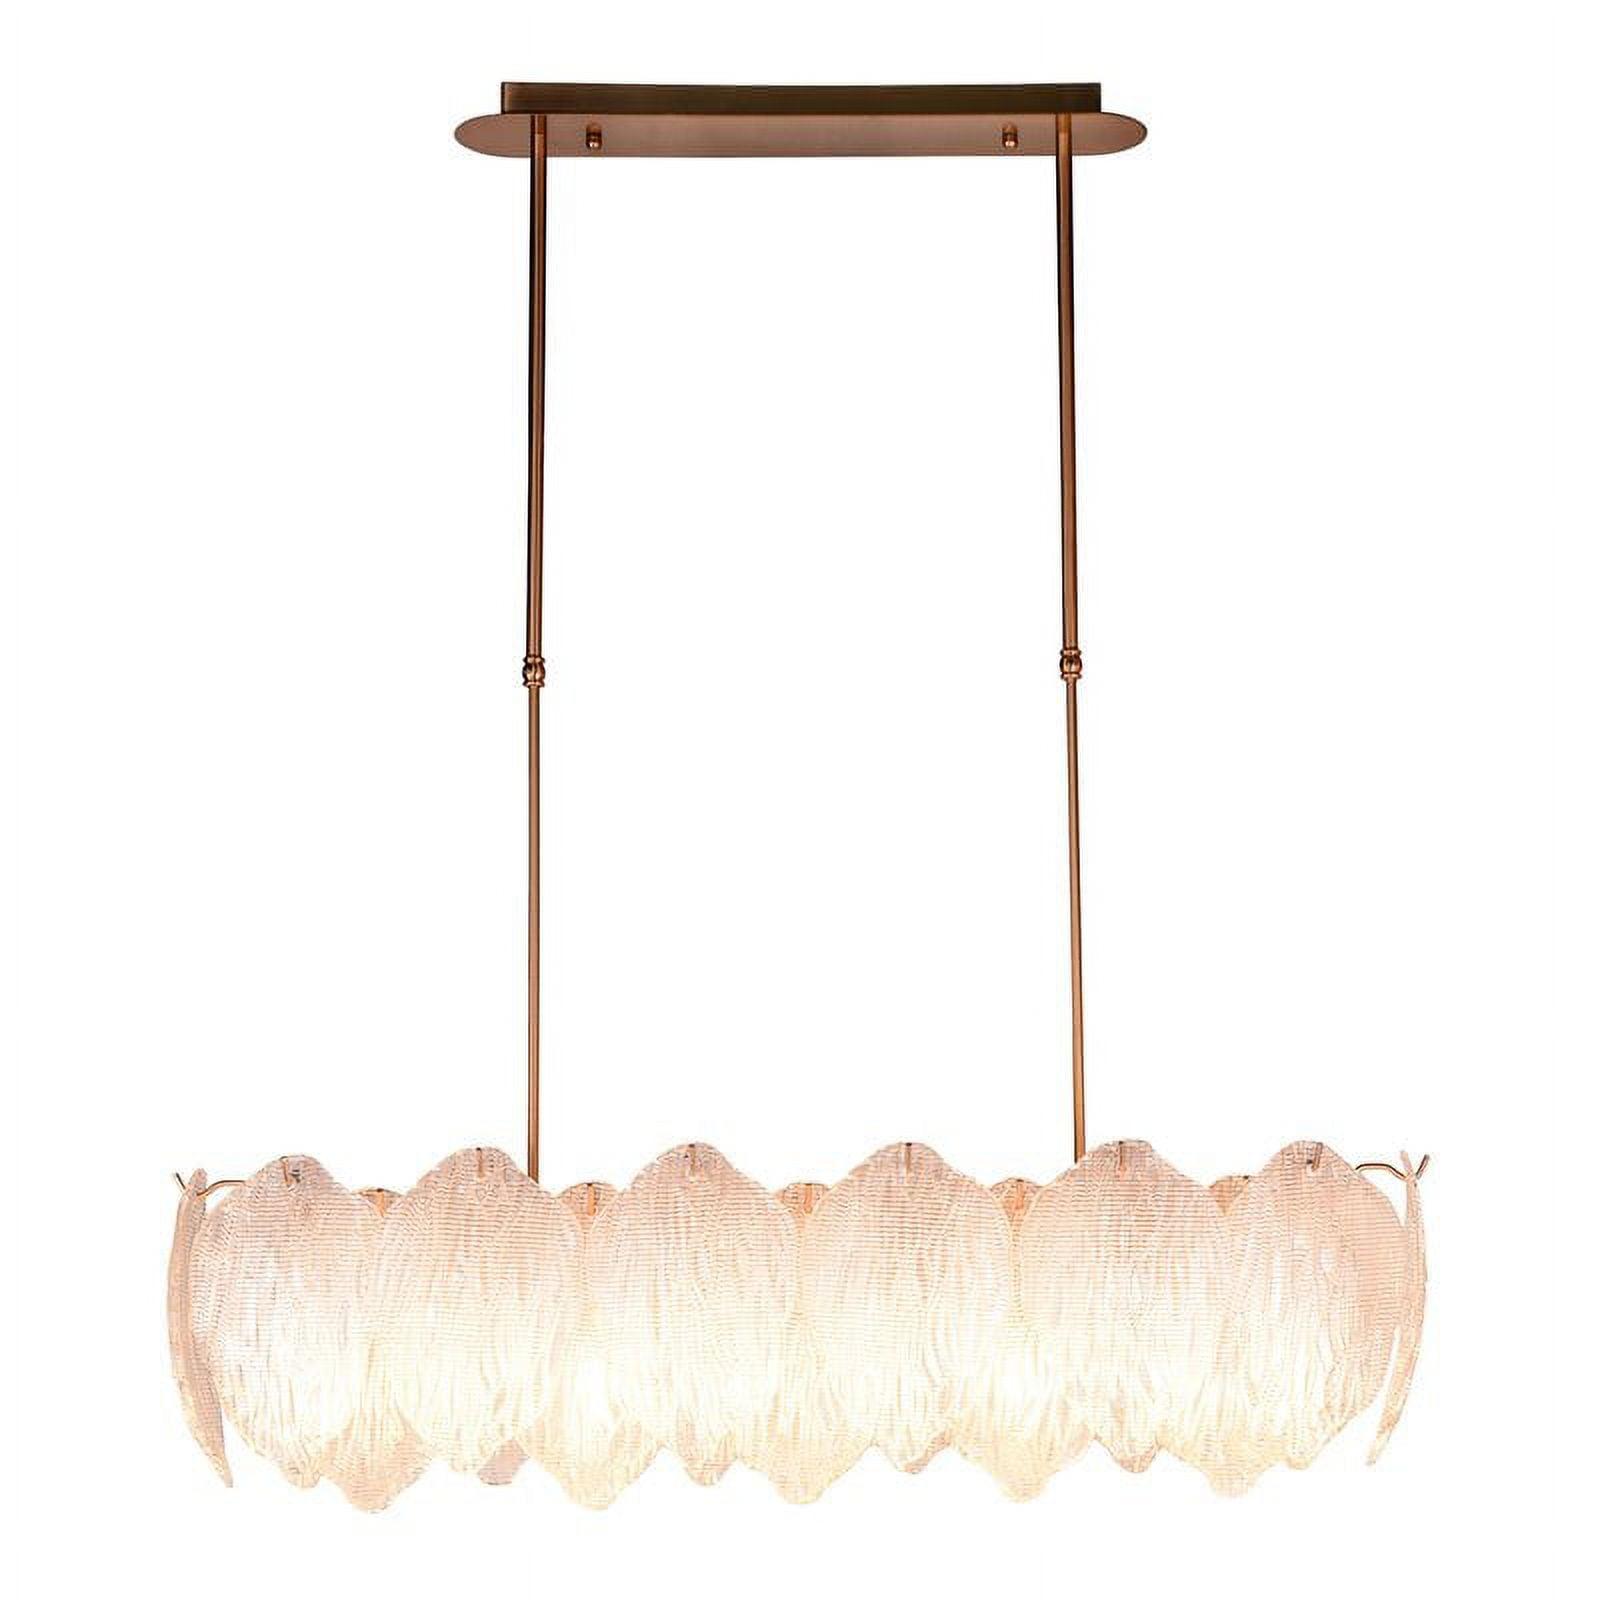 Acanthus 9-Light Oval Island Chandelier with Textured Glass in Aged Brass